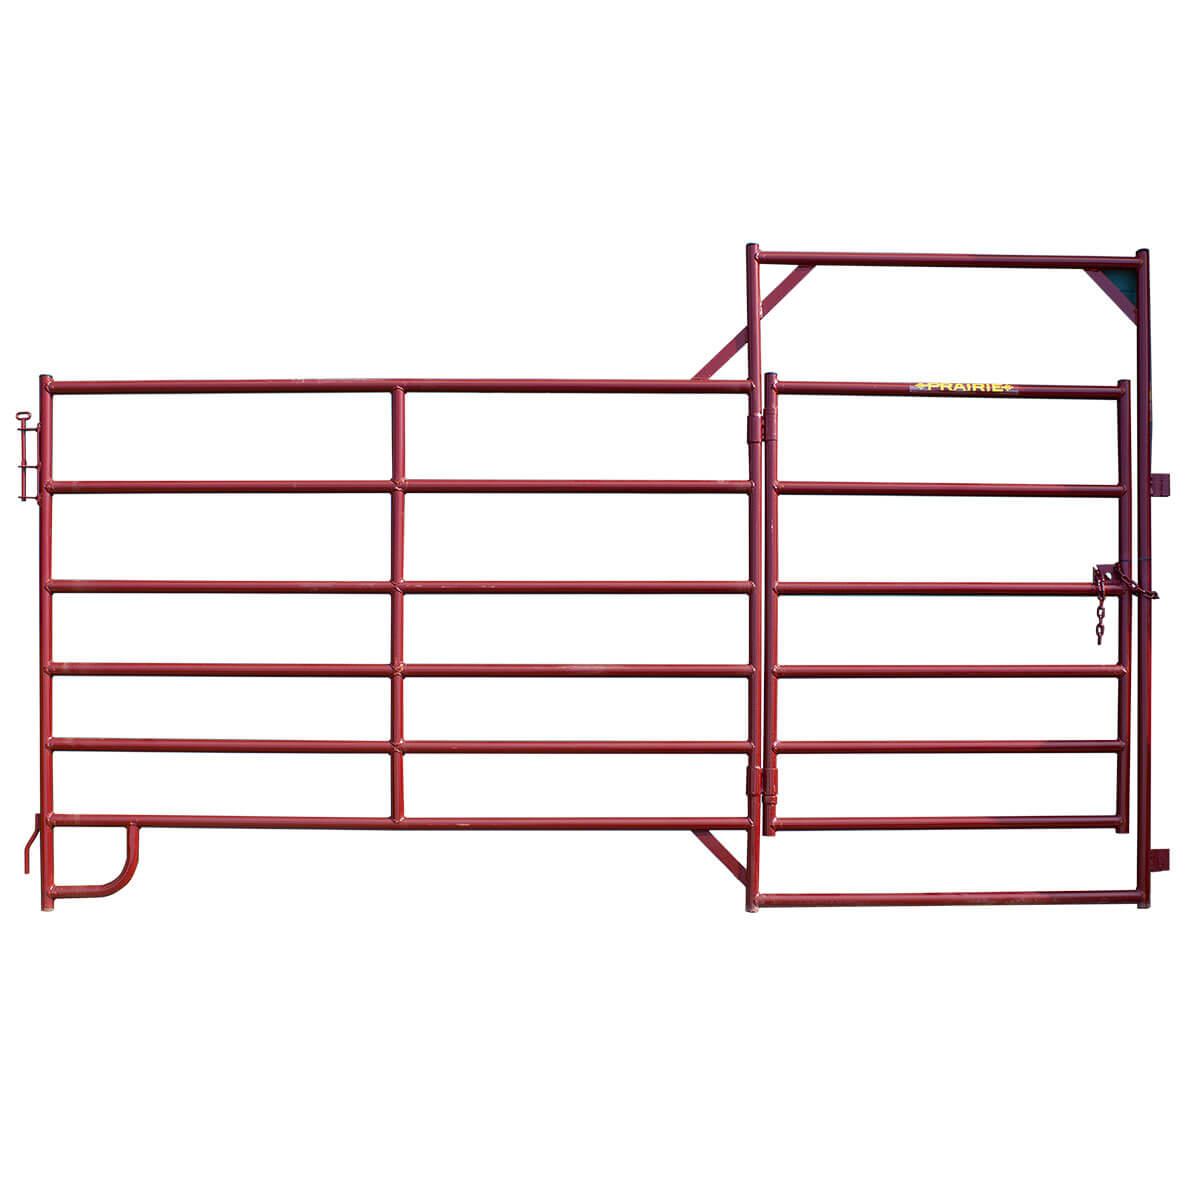 Prairie Panels with 4-ft Gate - 12-ft